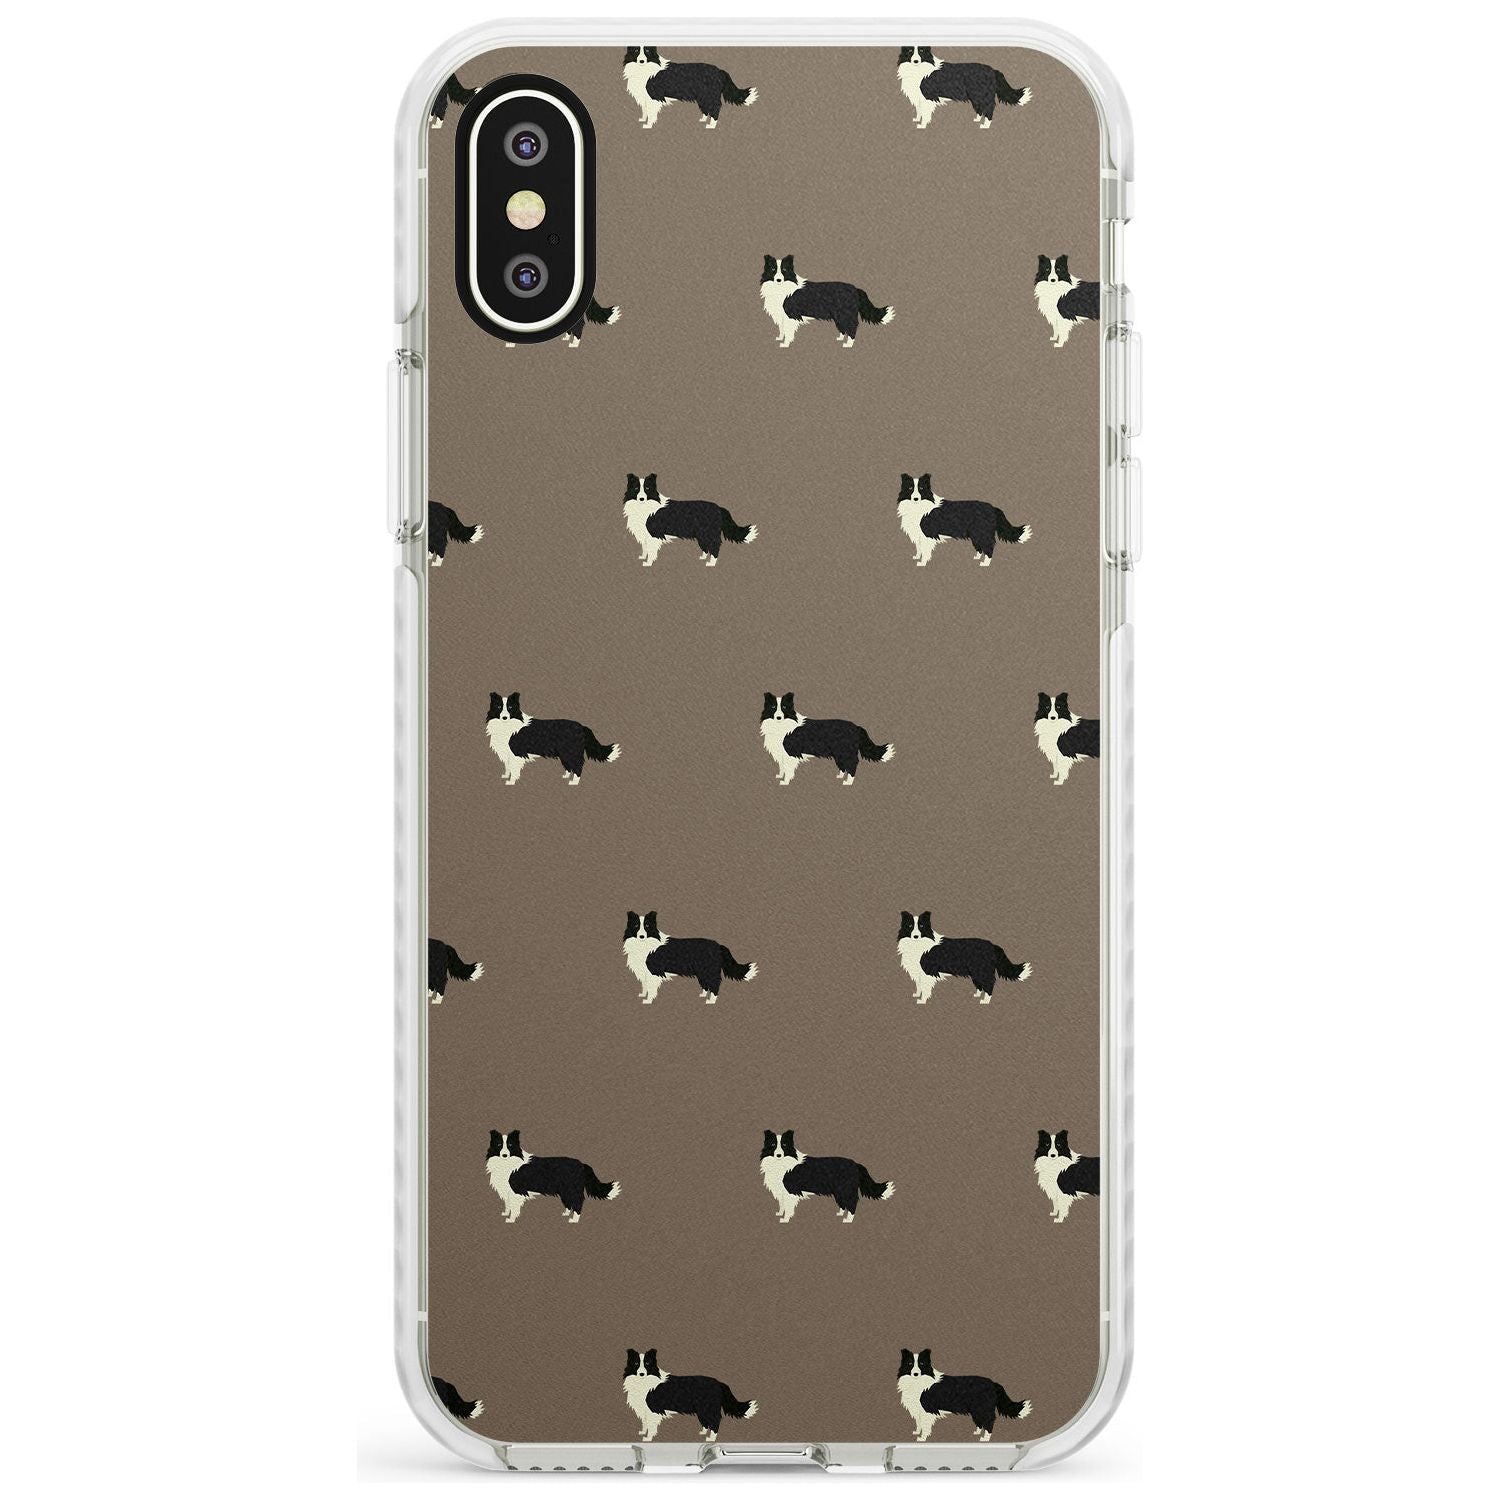 Border Collie Dog Pattern Impact Phone Case for iPhone X XS Max XR